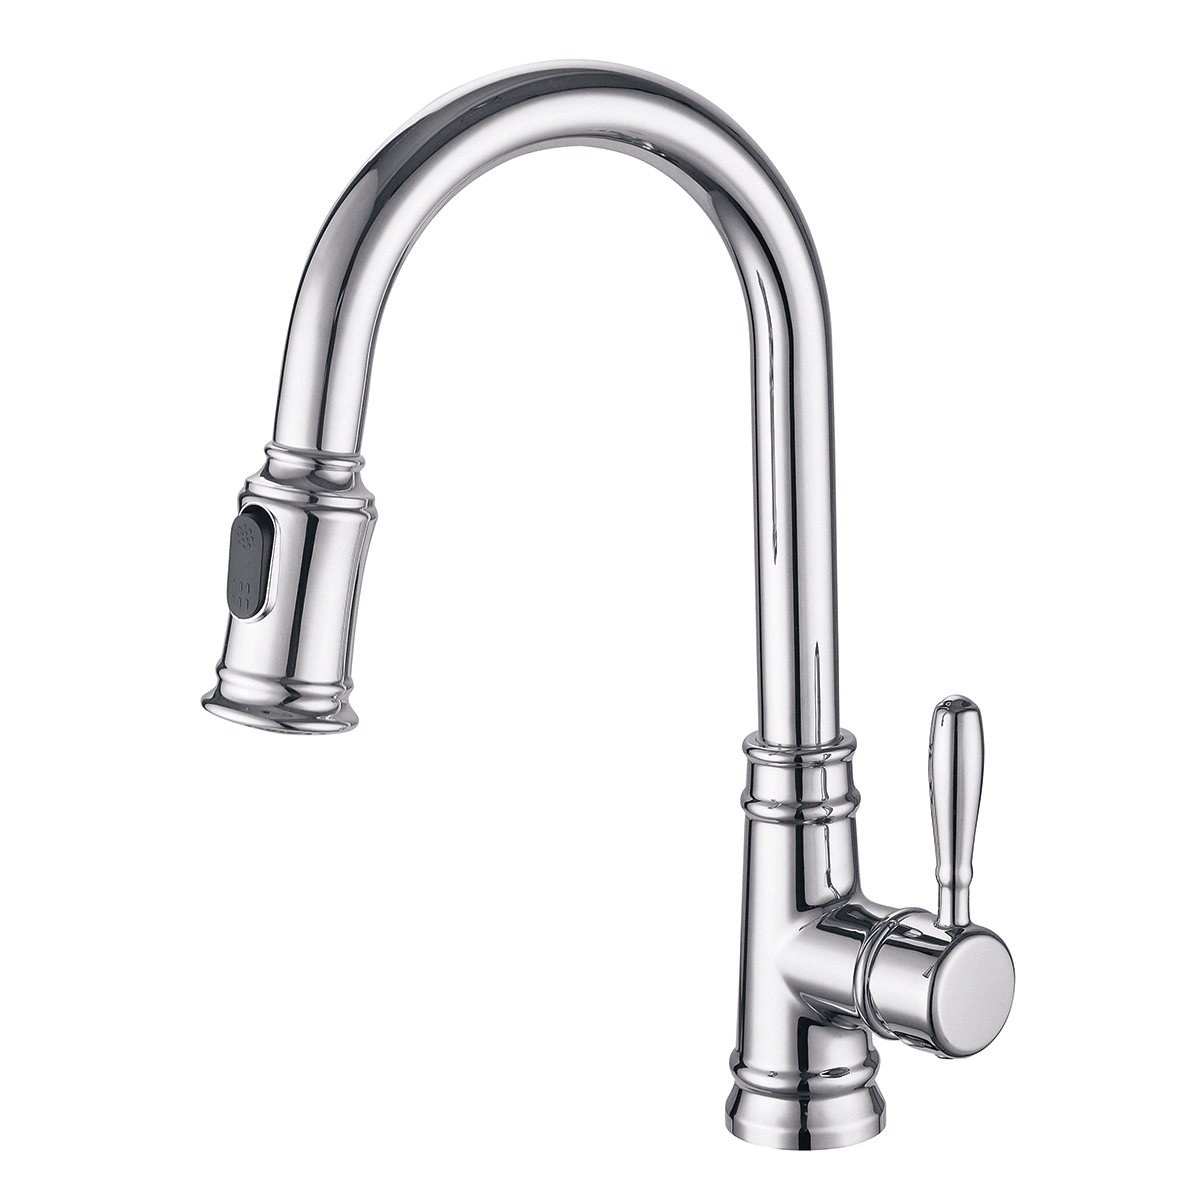 Aquacubic cUPC Single Lever High Arc Gooseneck Kitchen Sink Faucet with 3 Modes Pull Down Sprayer